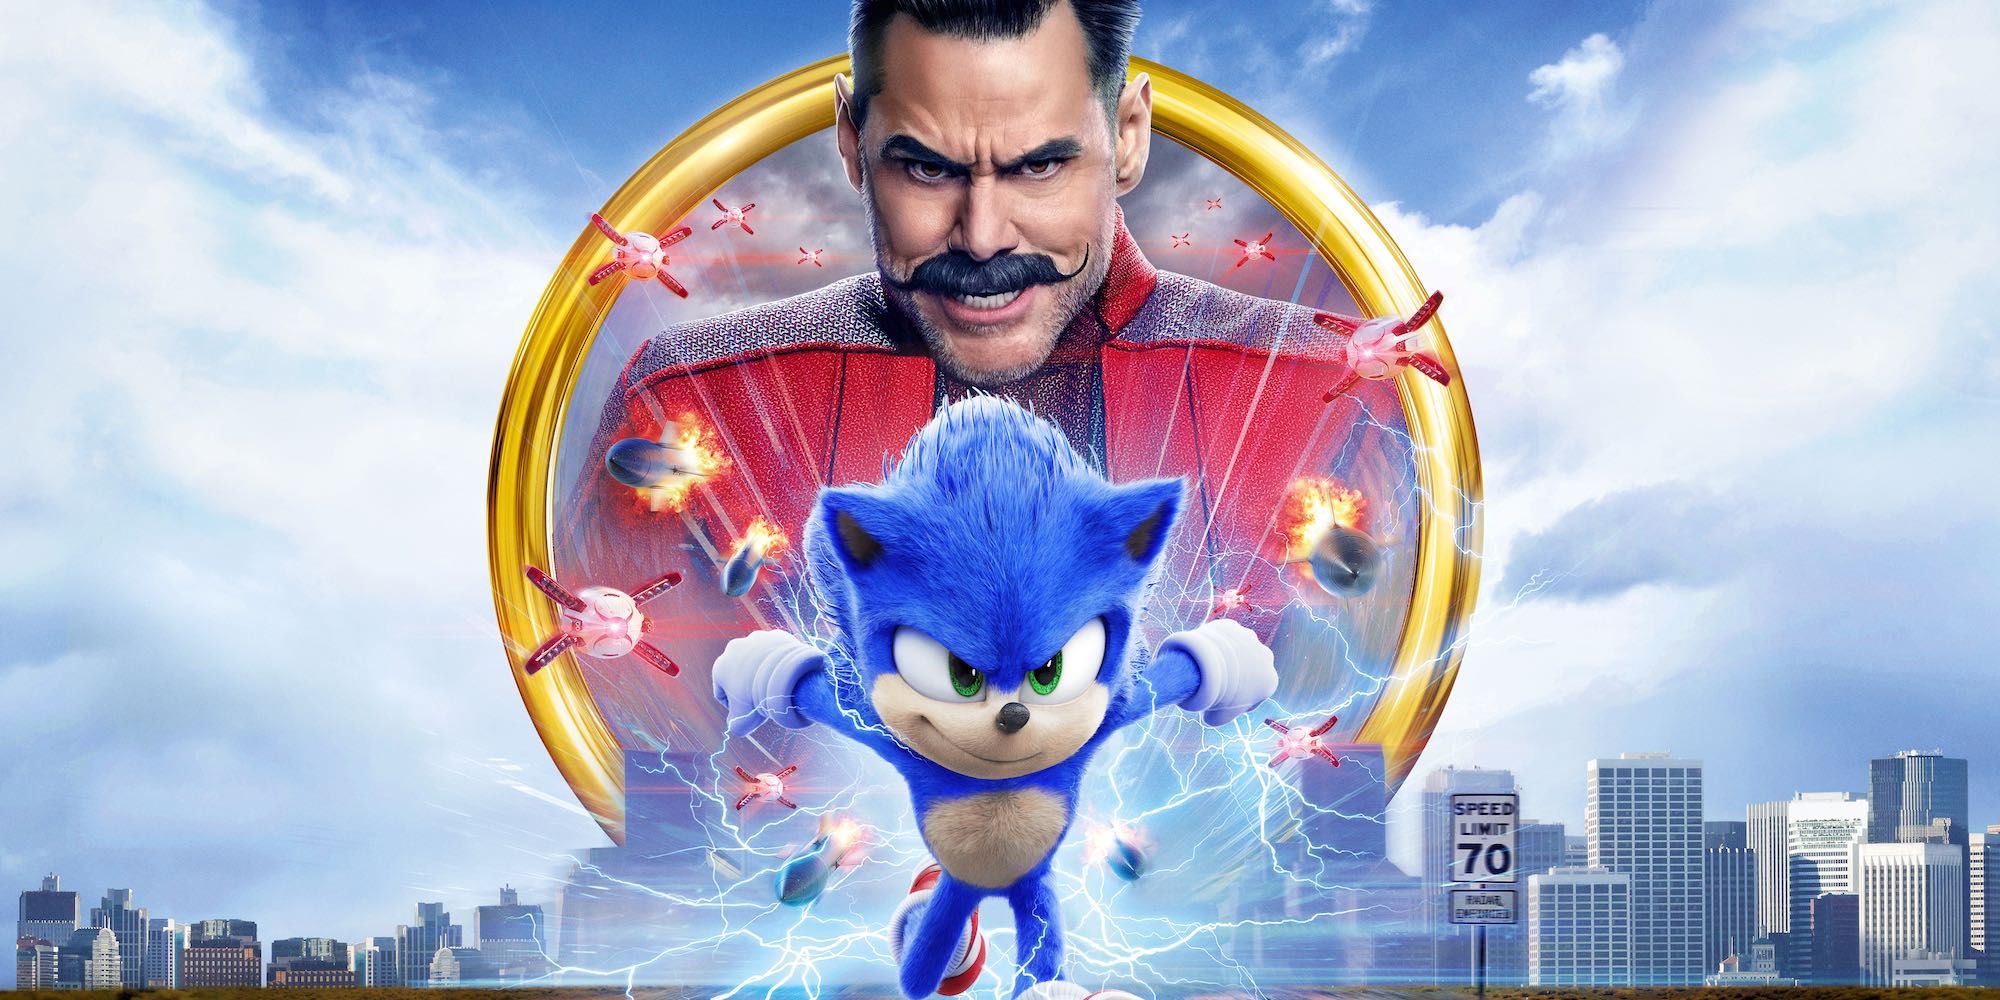 DIFF Review: Sonic the Hedgehog – Duke Independent Film Festival